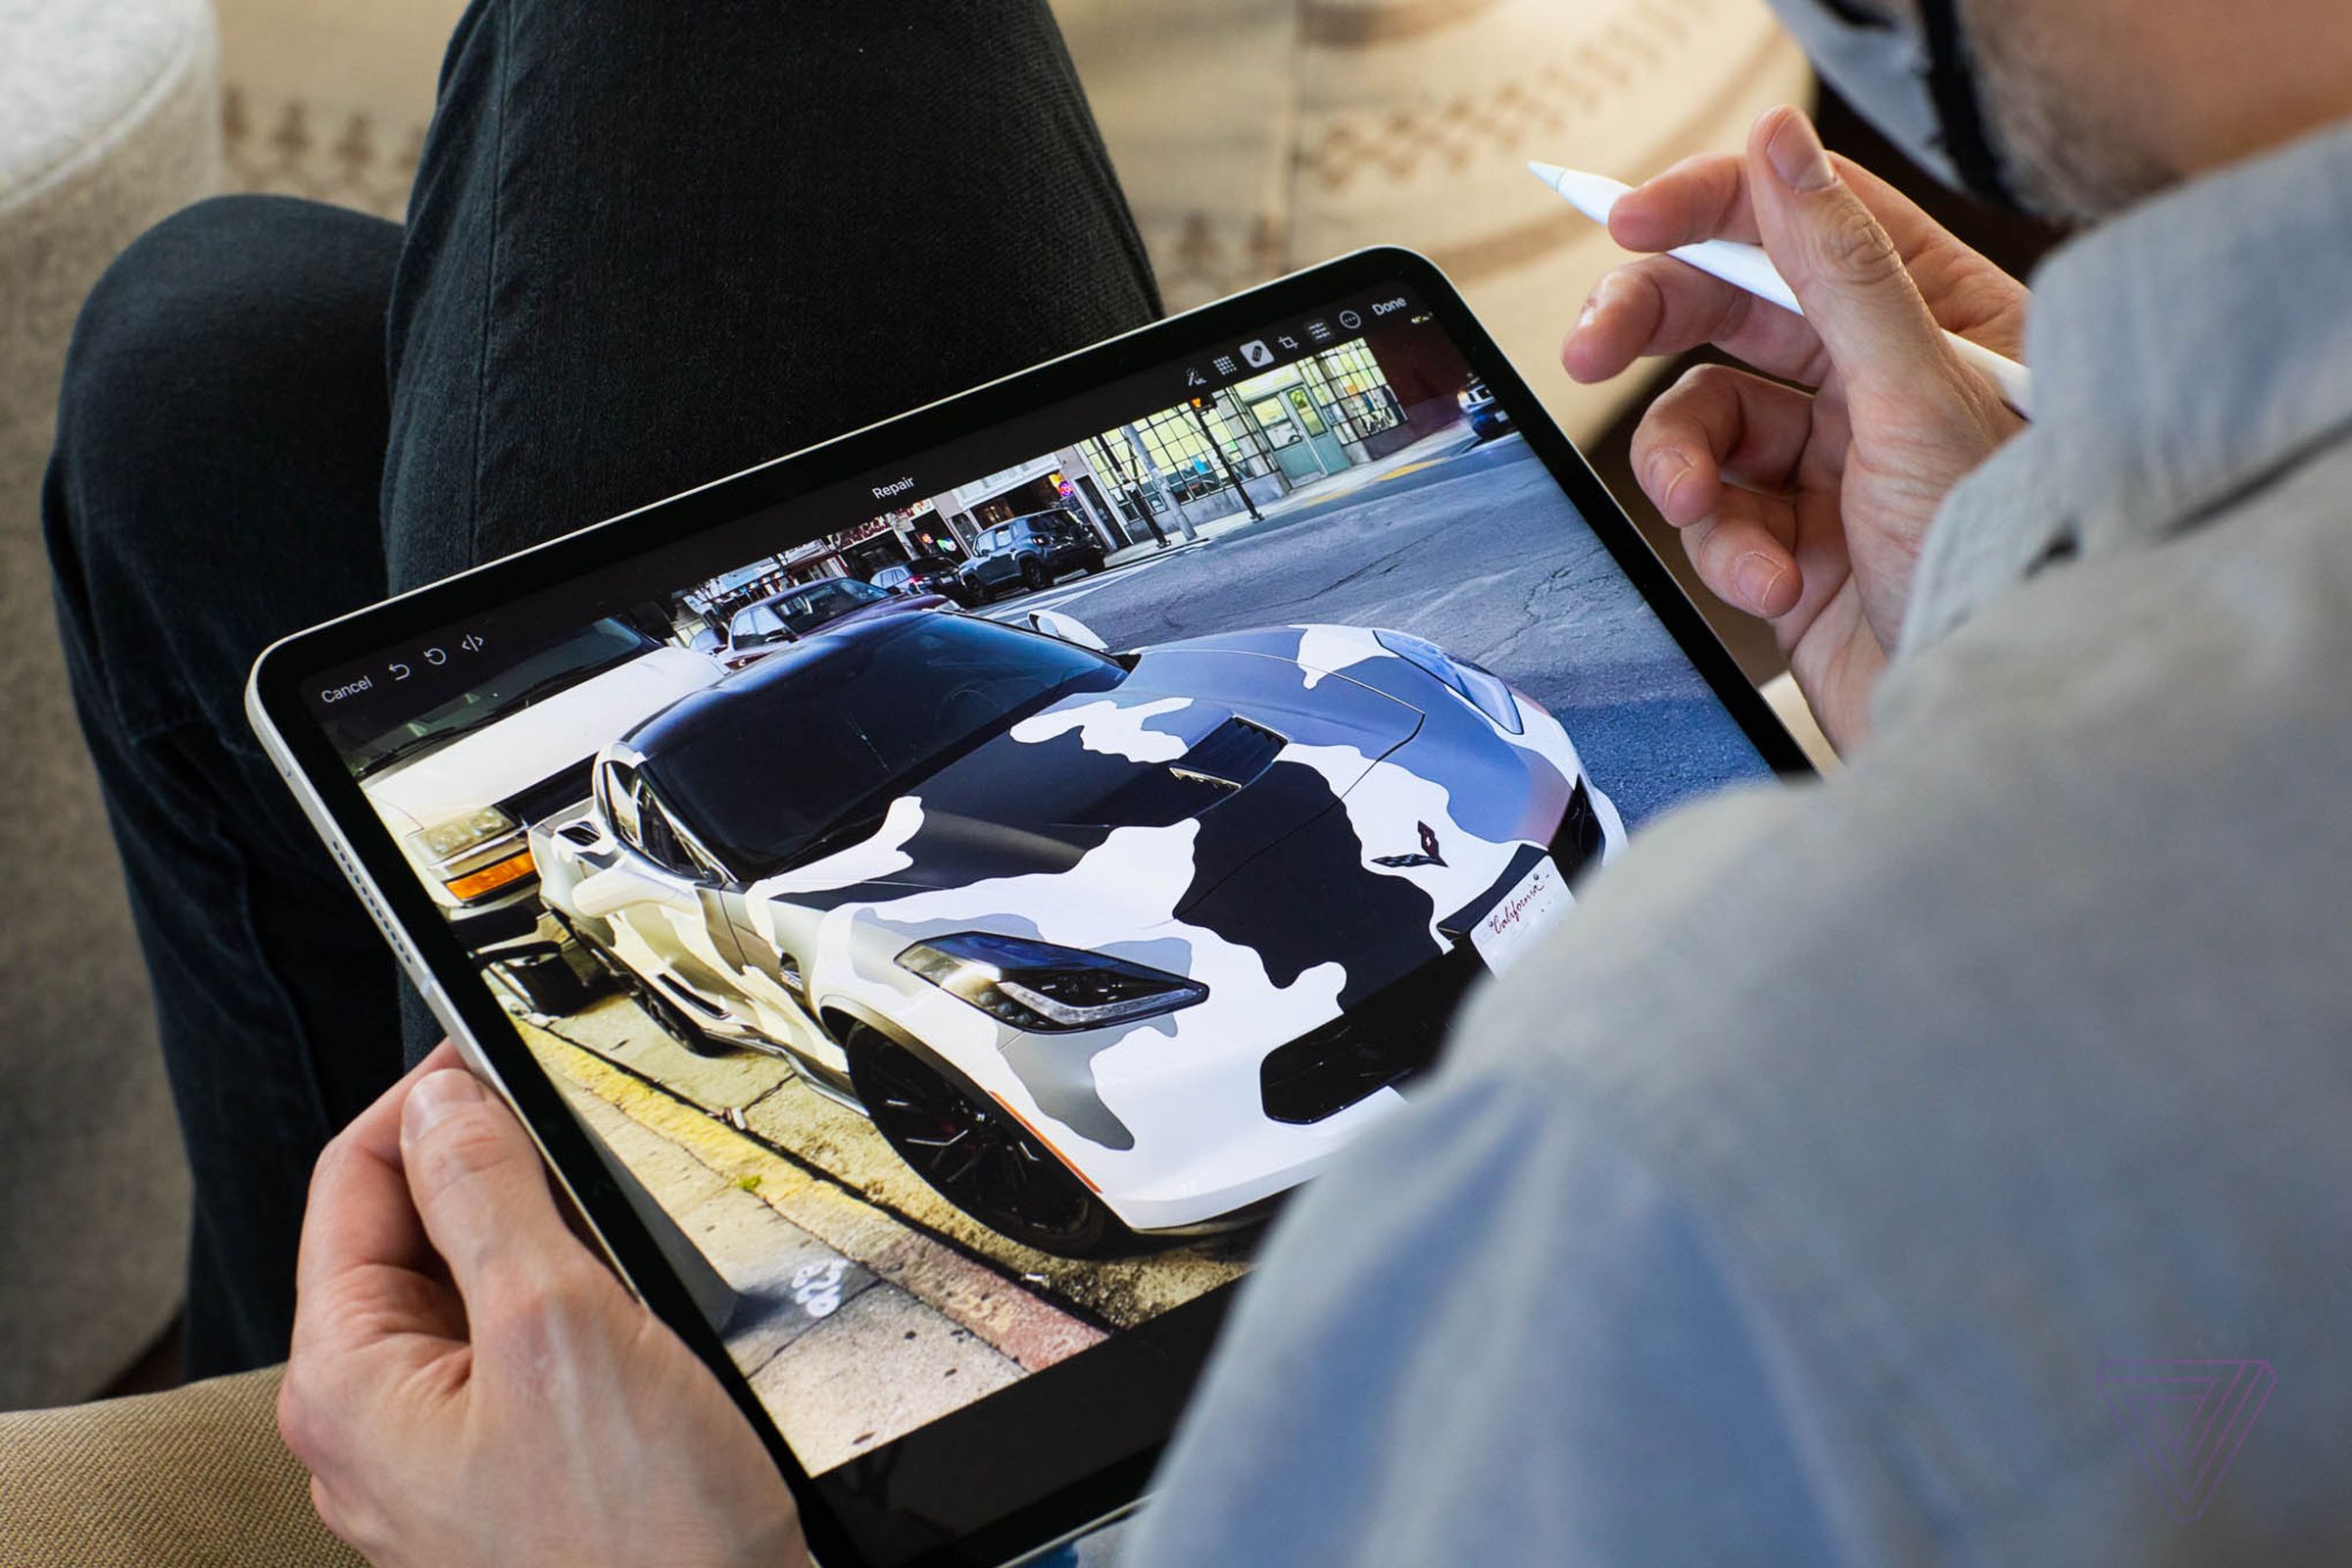 iPad Pro on a person's lap while using Apple Pencil for video editing on a tablet.